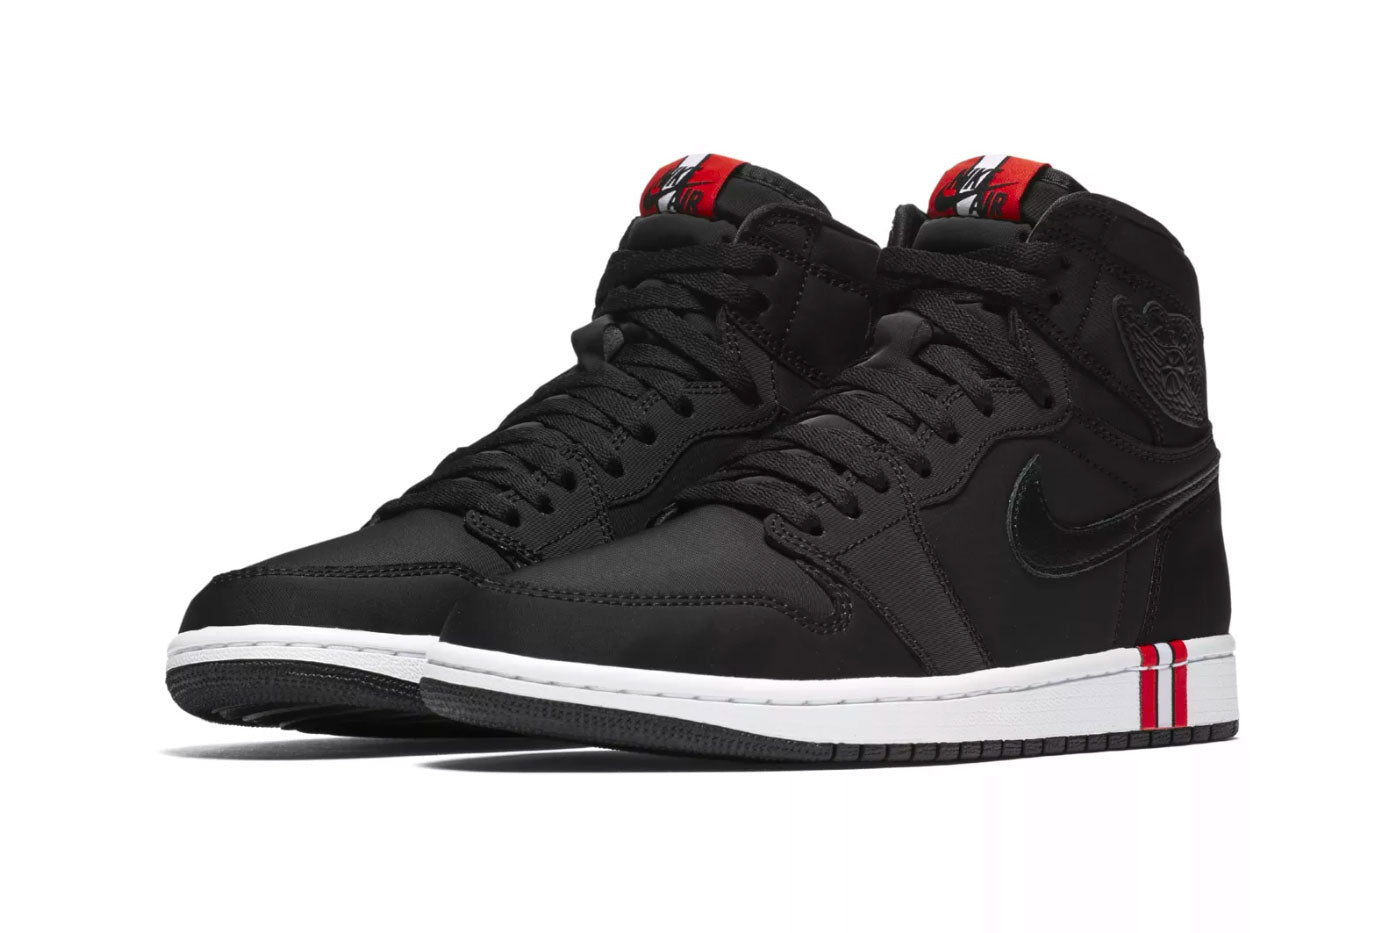 Pair of sneakers, Air Jordan 1 Retro High x Paris Saint-Germain, total black colorway high shoes with vertical red/white stripes detail on the sole and tongue